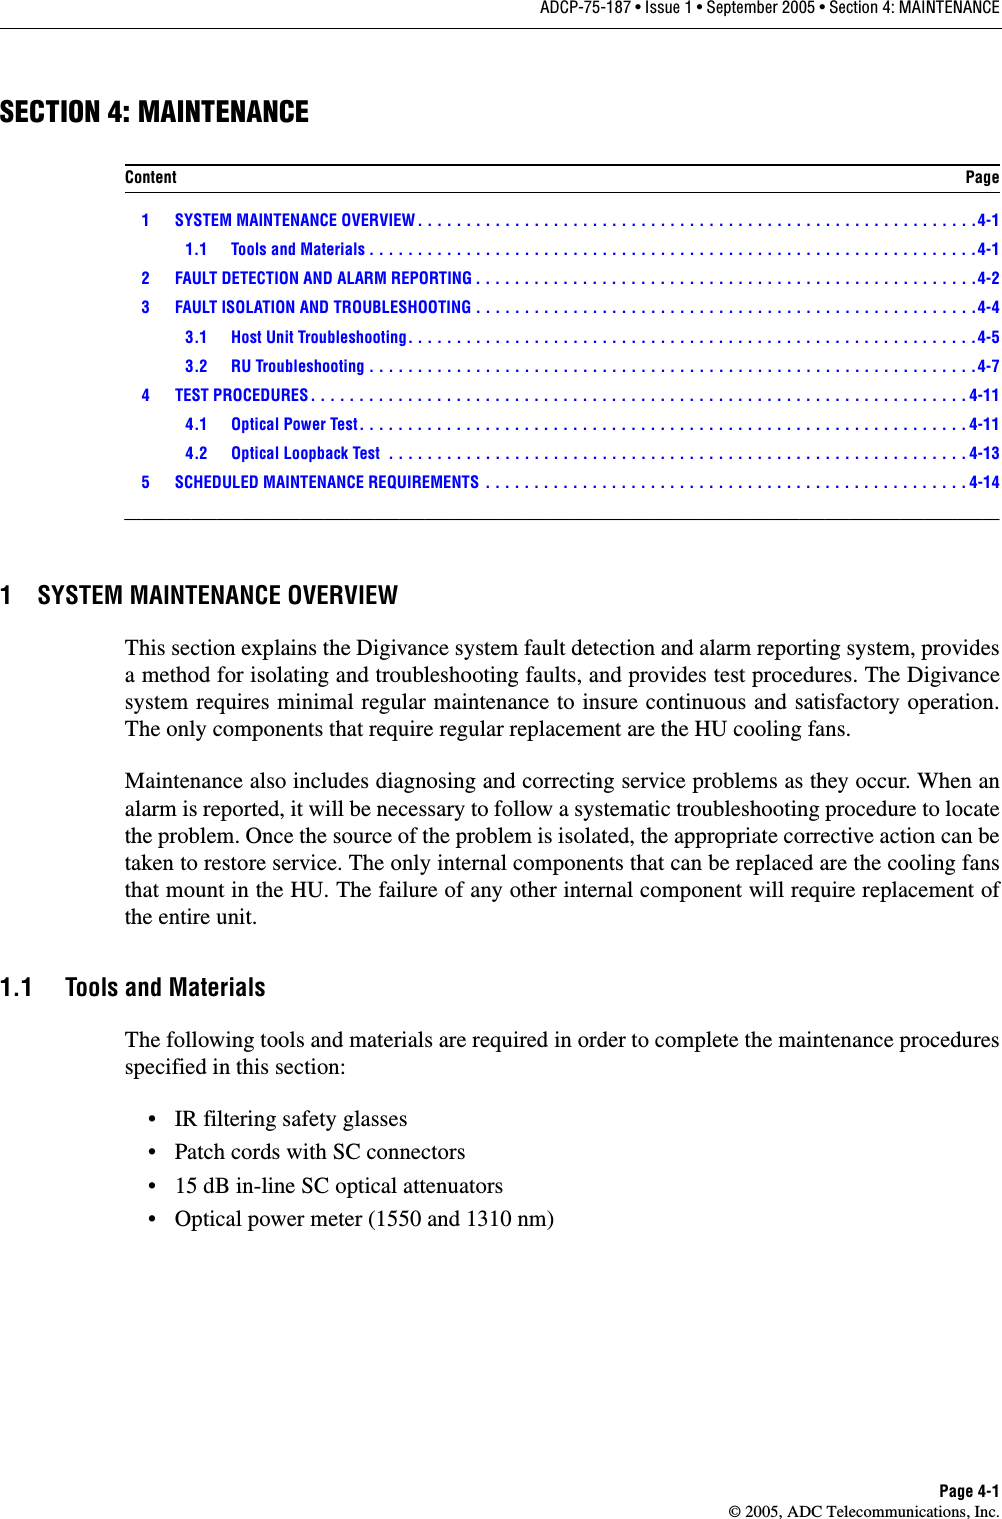 ADCP-75-187 • Issue 1 • September 2005 • Section 4: MAINTENANCEPage 4-1© 2005, ADC Telecommunications, Inc.SECTION 4: MAINTENANCE 1 SYSTEM MAINTENANCE OVERVIEW . . . . . . . . . . . . . . . . . . . . . . . . . . . . . . . . . . . . . . . . . . . . . . . . . . . . . . . . . .4-11.1 Tools and Materials . . . . . . . . . . . . . . . . . . . . . . . . . . . . . . . . . . . . . . . . . . . . . . . . . . . . . . . . . . . . . . .4-12 FAULT DETECTION AND ALARM REPORTING . . . . . . . . . . . . . . . . . . . . . . . . . . . . . . . . . . . . . . . . . . . . . . . . . . . .4-23 FAULT ISOLATION AND TROUBLESHOOTING . . . . . . . . . . . . . . . . . . . . . . . . . . . . . . . . . . . . . . . . . . . . . . . . . . . .4-43.1 Host Unit Troubleshooting. . . . . . . . . . . . . . . . . . . . . . . . . . . . . . . . . . . . . . . . . . . . . . . . . . . . . . . . . . .4-53.2 RU Troubleshooting . . . . . . . . . . . . . . . . . . . . . . . . . . . . . . . . . . . . . . . . . . . . . . . . . . . . . . . . . . . . . . .4-74 TEST PROCEDURES . . . . . . . . . . . . . . . . . . . . . . . . . . . . . . . . . . . . . . . . . . . . . . . . . . . . . . . . . . . . . . . . . . . . 4-114.1 Optical Power Test. . . . . . . . . . . . . . . . . . . . . . . . . . . . . . . . . . . . . . . . . . . . . . . . . . . . . . . . . . . . . . . 4-114.2 Optical Loopback Test  . . . . . . . . . . . . . . . . . . . . . . . . . . . . . . . . . . . . . . . . . . . . . . . . . . . . . . . . . . . . 4-135 SCHEDULED MAINTENANCE REQUIREMENTS  . . . . . . . . . . . . . . . . . . . . . . . . . . . . . . . . . . . . . . . . . . . . . . . . . . 4-14_________________________________________________________________________________________________________1 SYSTEM MAINTENANCE OVERVIEWThis section explains the Digivance system fault detection and alarm reporting system, providesa method for isolating and troubleshooting faults, and provides test procedures. The Digivancesystem requires minimal regular maintenance to insure continuous and satisfactory operation.The only components that require regular replacement are the HU cooling fans.Maintenance also includes diagnosing and correcting service problems as they occur. When analarm is reported, it will be necessary to follow a systematic troubleshooting procedure to locatethe problem. Once the source of the problem is isolated, the appropriate corrective action can betaken to restore service. The only internal components that can be replaced are the cooling fansthat mount in the HU. The failure of any other internal component will require replacement ofthe entire unit. 1.1 Tools and MaterialsThe following tools and materials are required in order to complete the maintenance proceduresspecified in this section: • IR filtering safety glasses• Patch cords with SC connectors• 15 dB in-line SC optical attenuators• Optical power meter (1550 and 1310 nm)Content Page